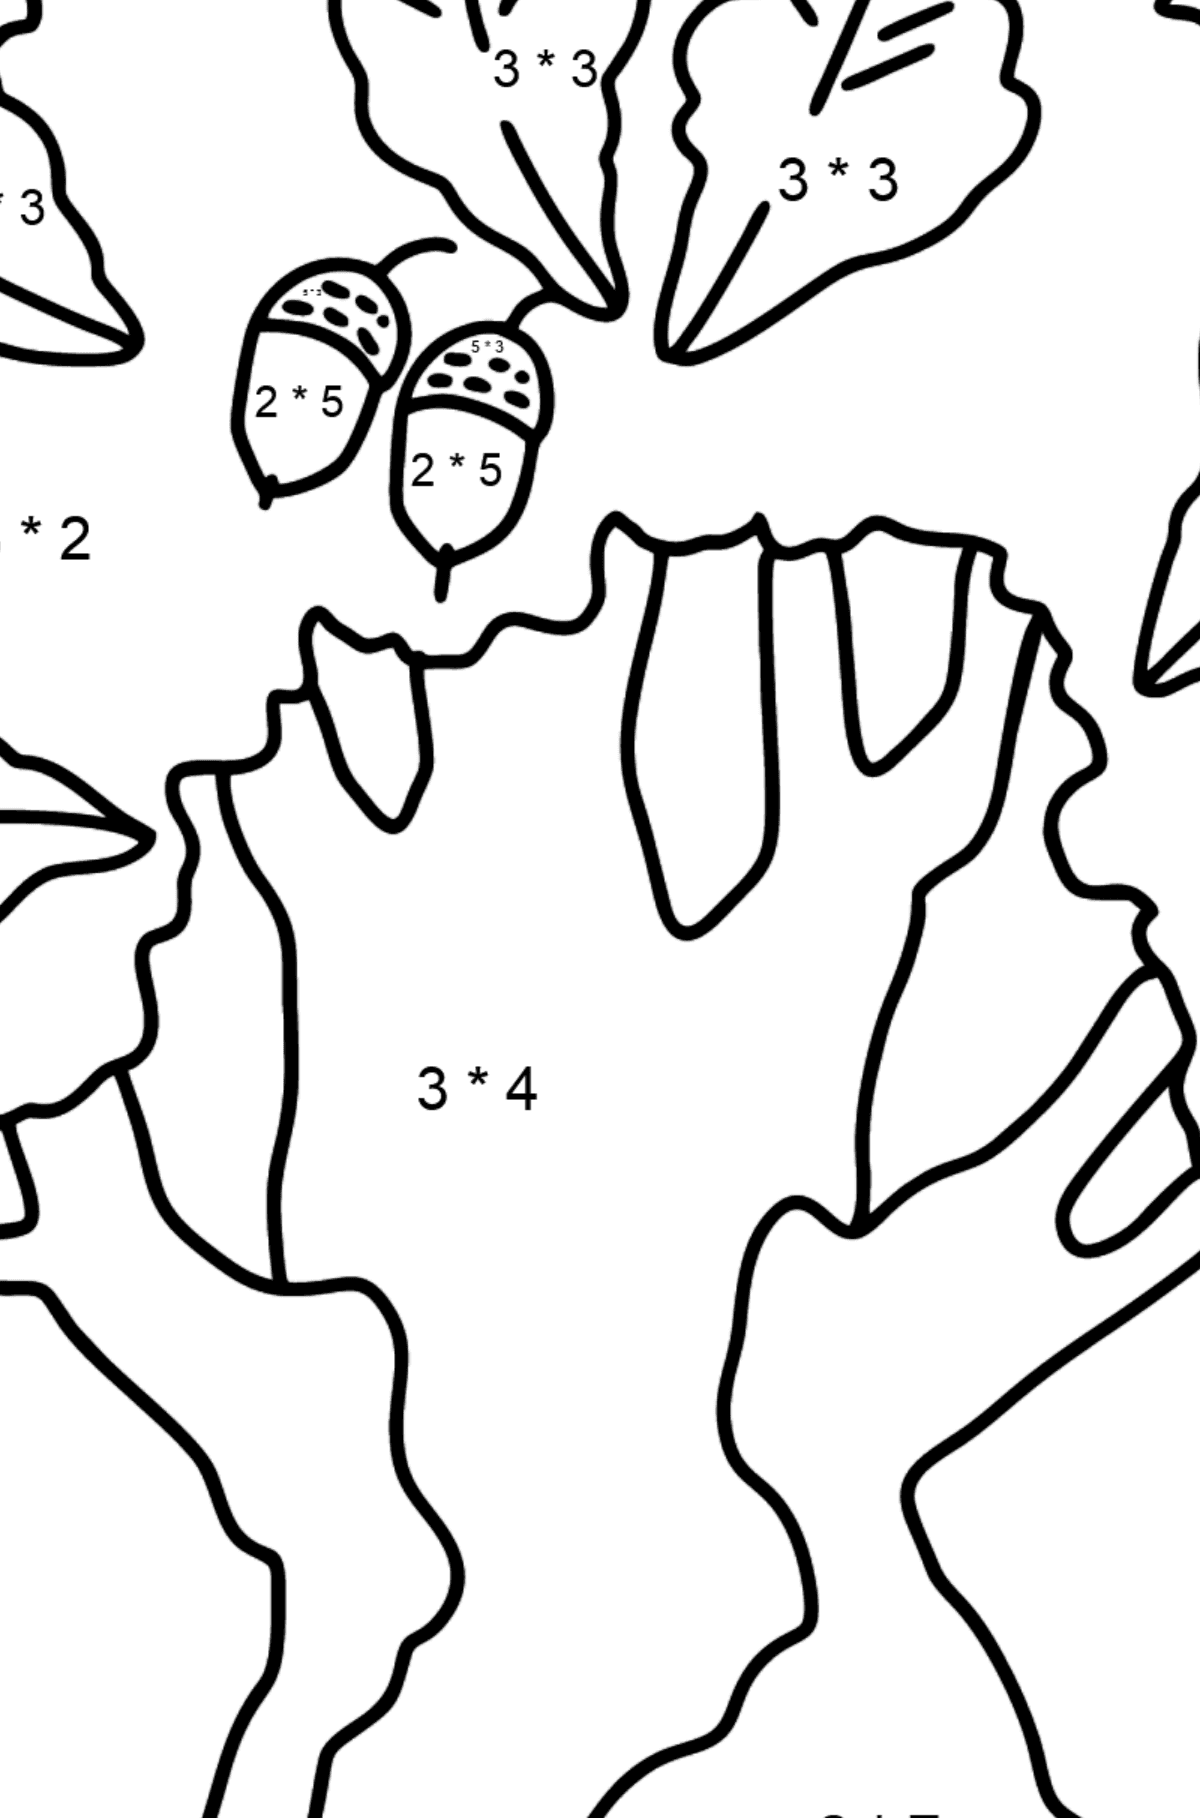 Oak coloring page - Difficult - Math Coloring - Multiplication for Kids